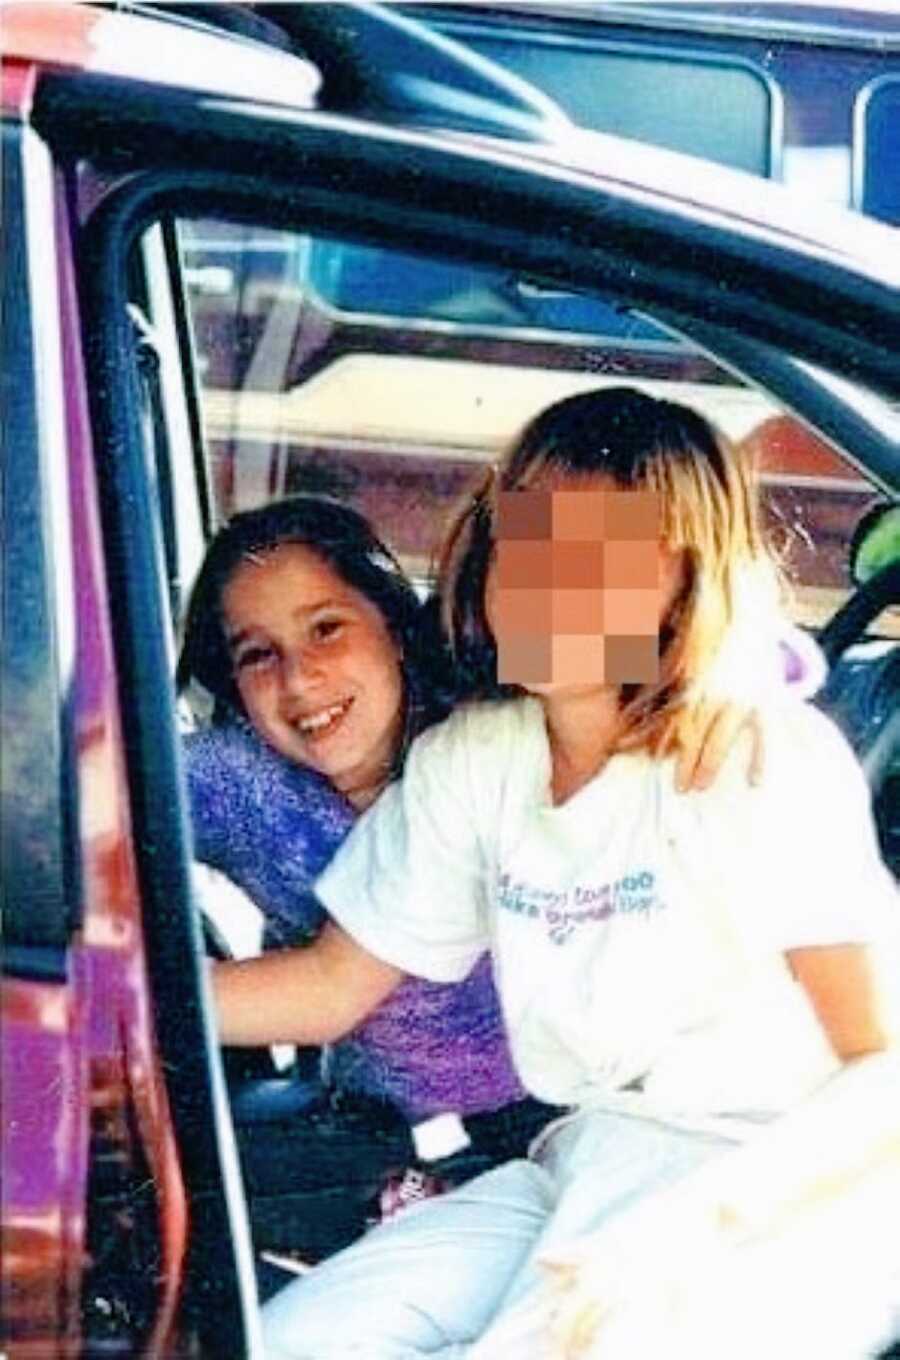 Little girl and her sister sit in a car together while smiling and spending time together